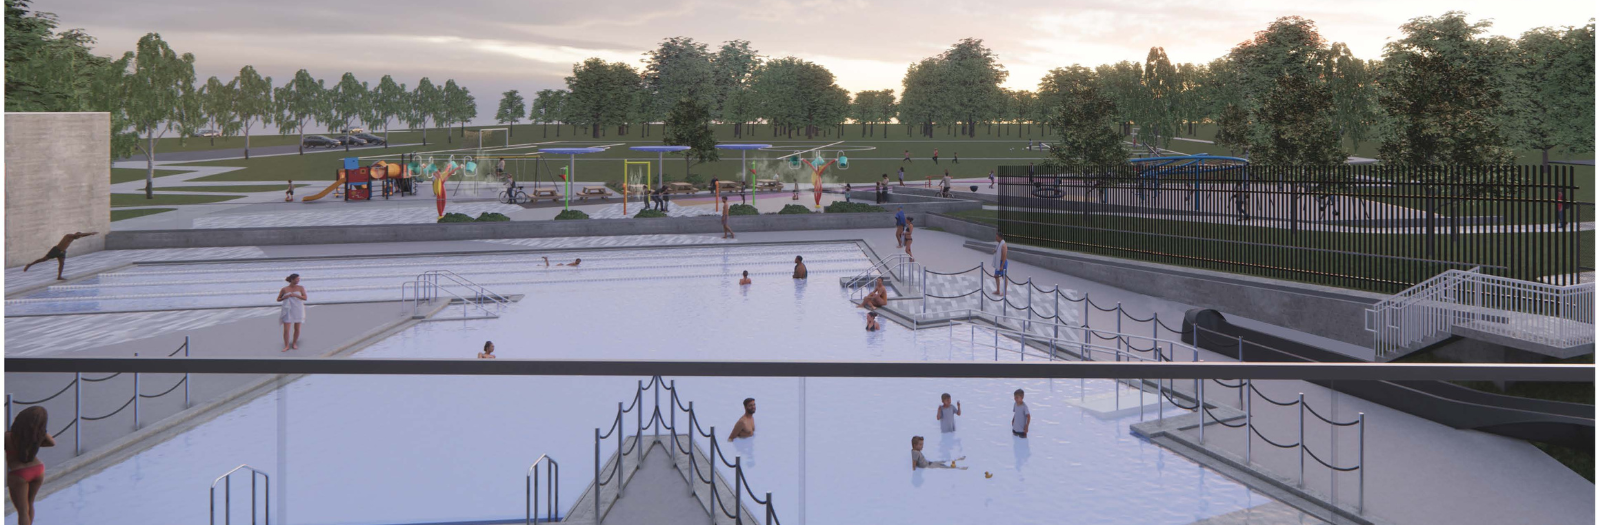 Rendering of Rotary Park